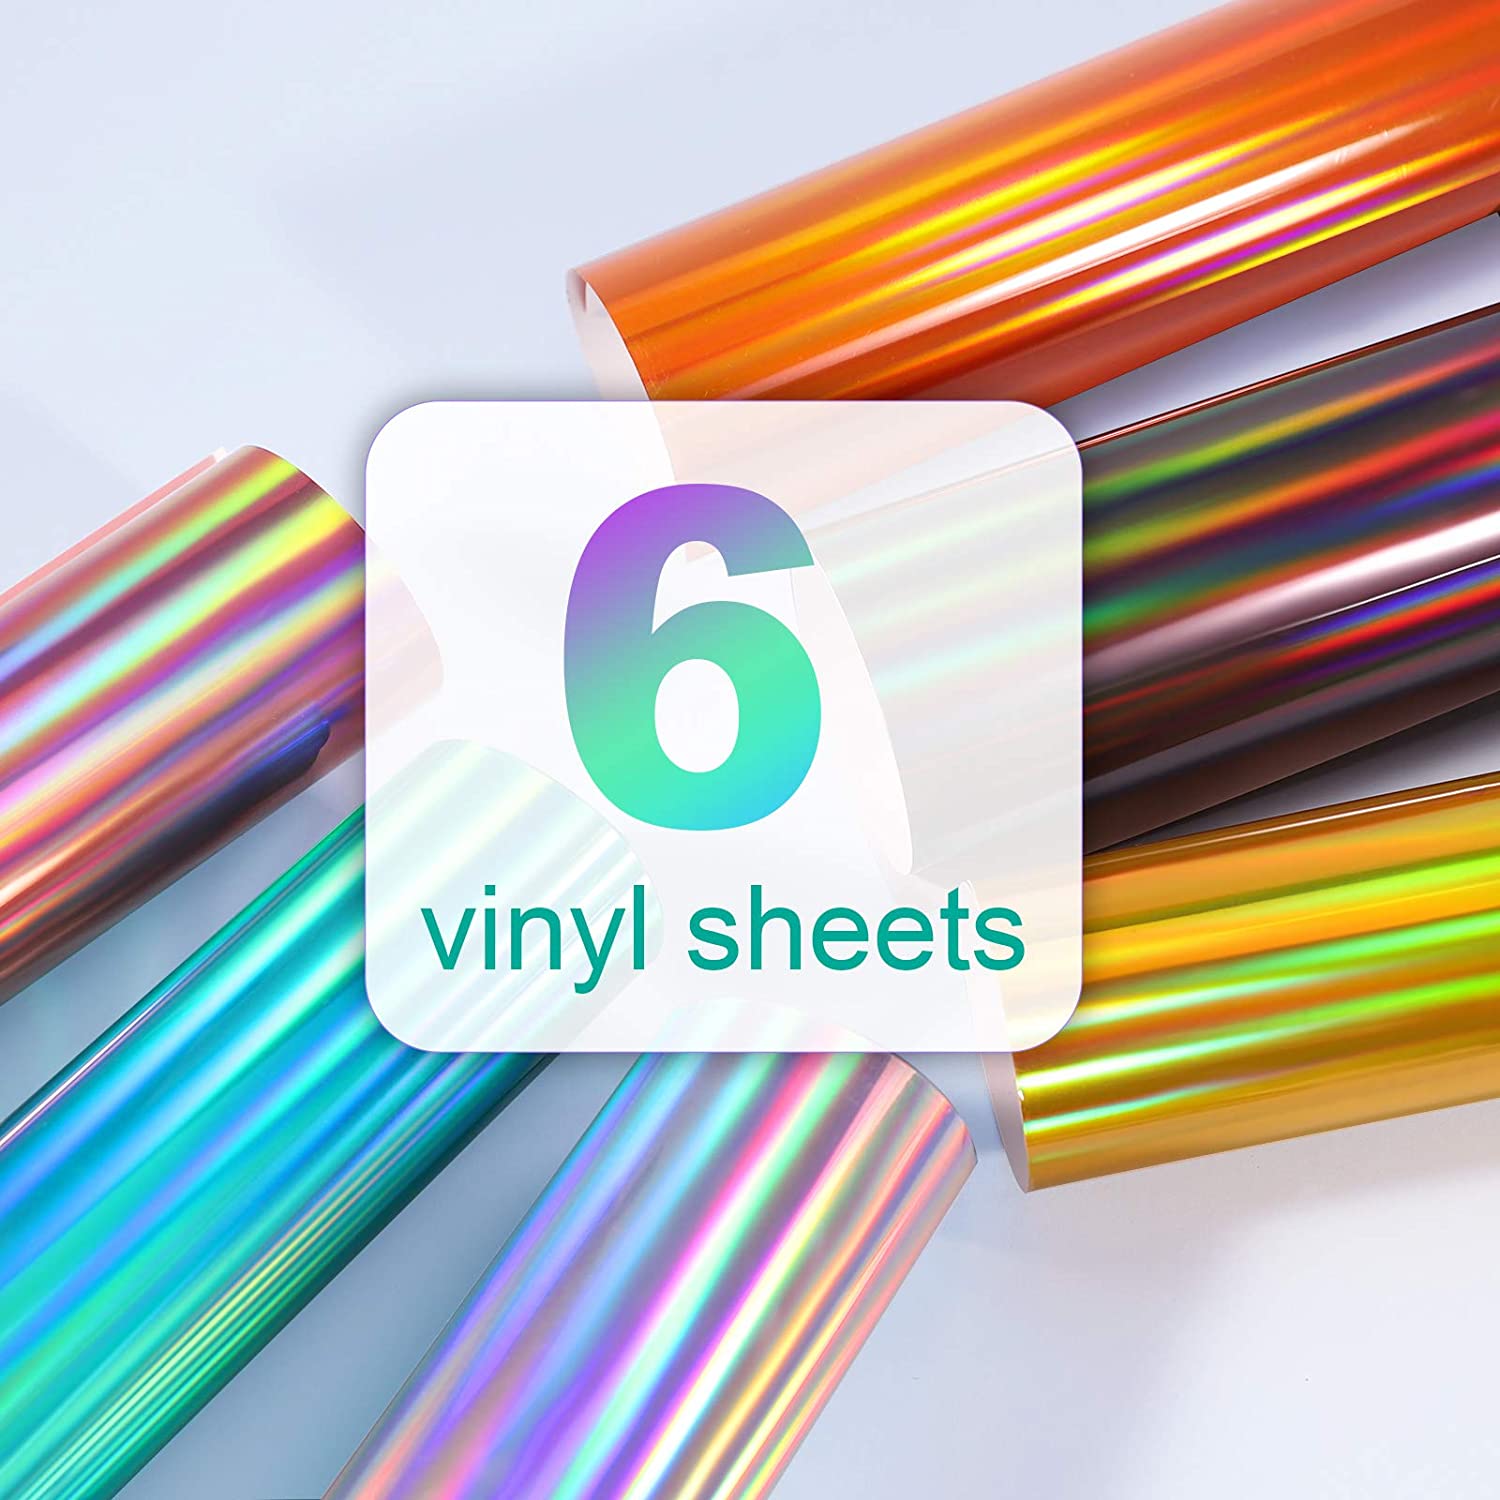 6 Rolls Shiny Gift Wrapping Paper, 6 Iridescent Holographic Colors